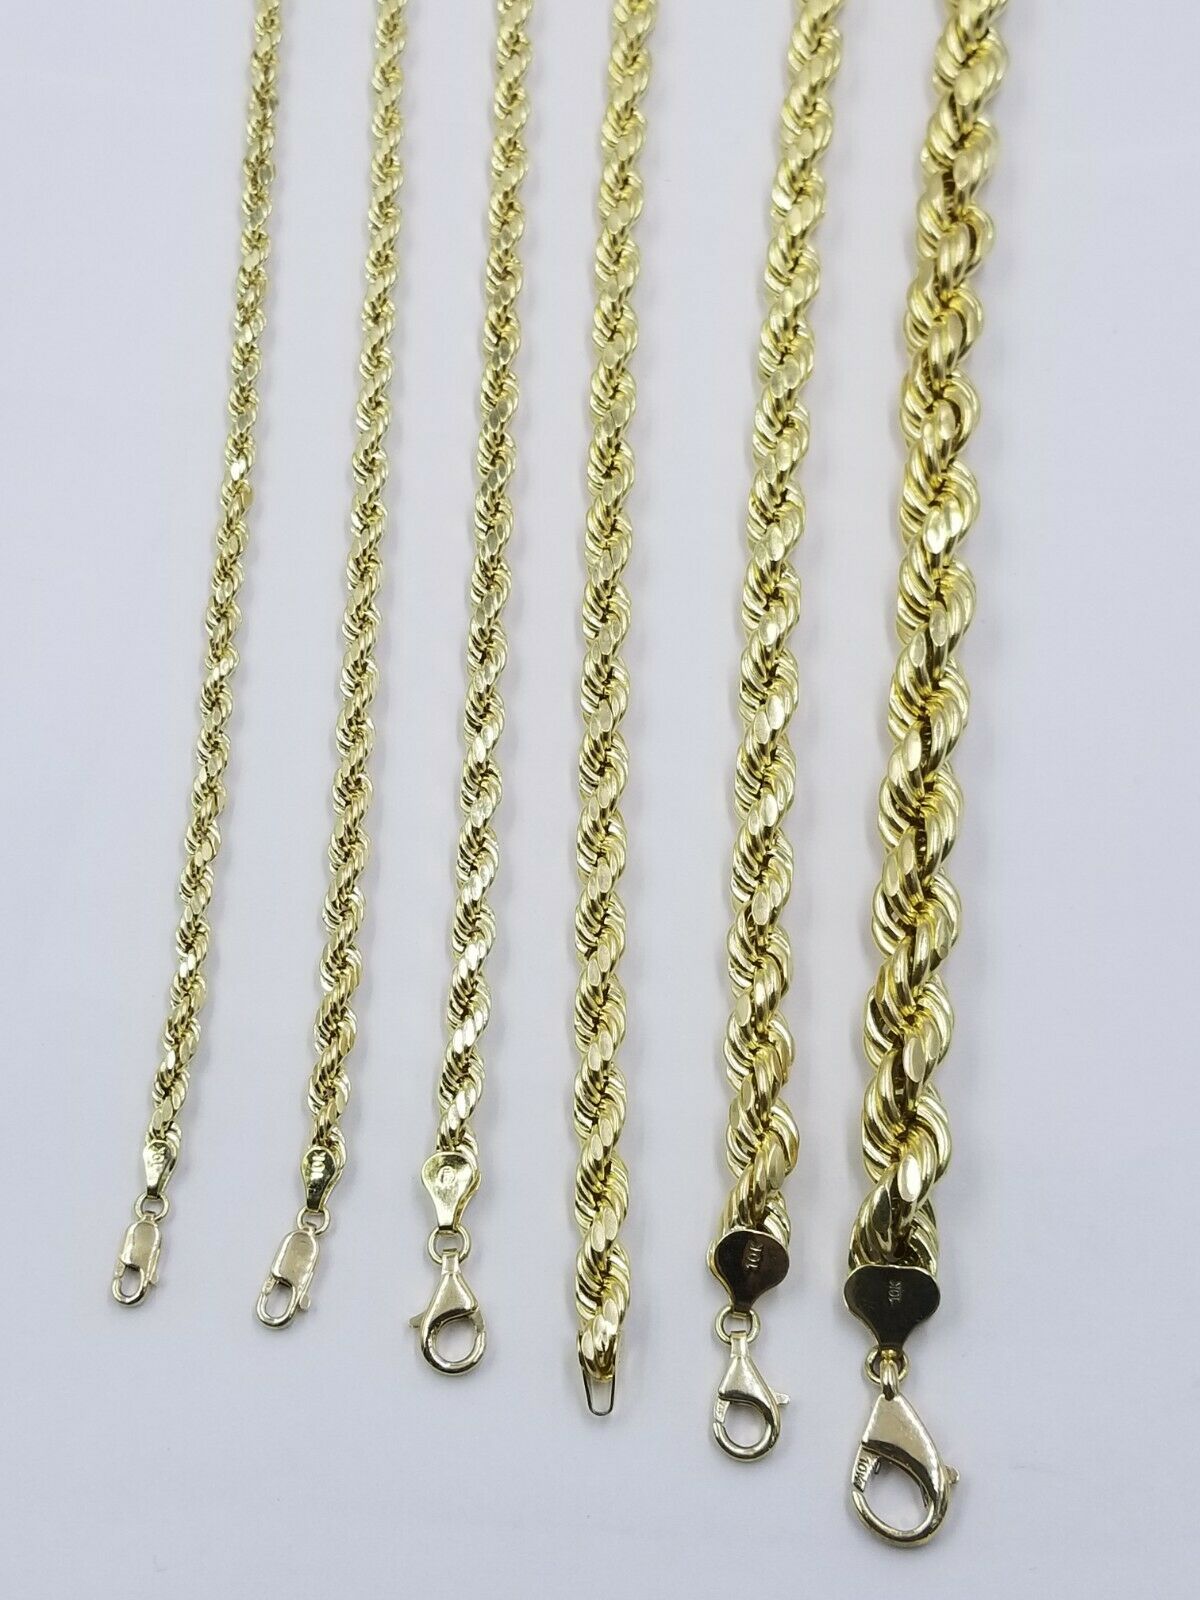 10k Yellow Gold Rope Chain Necklace Men Women 18